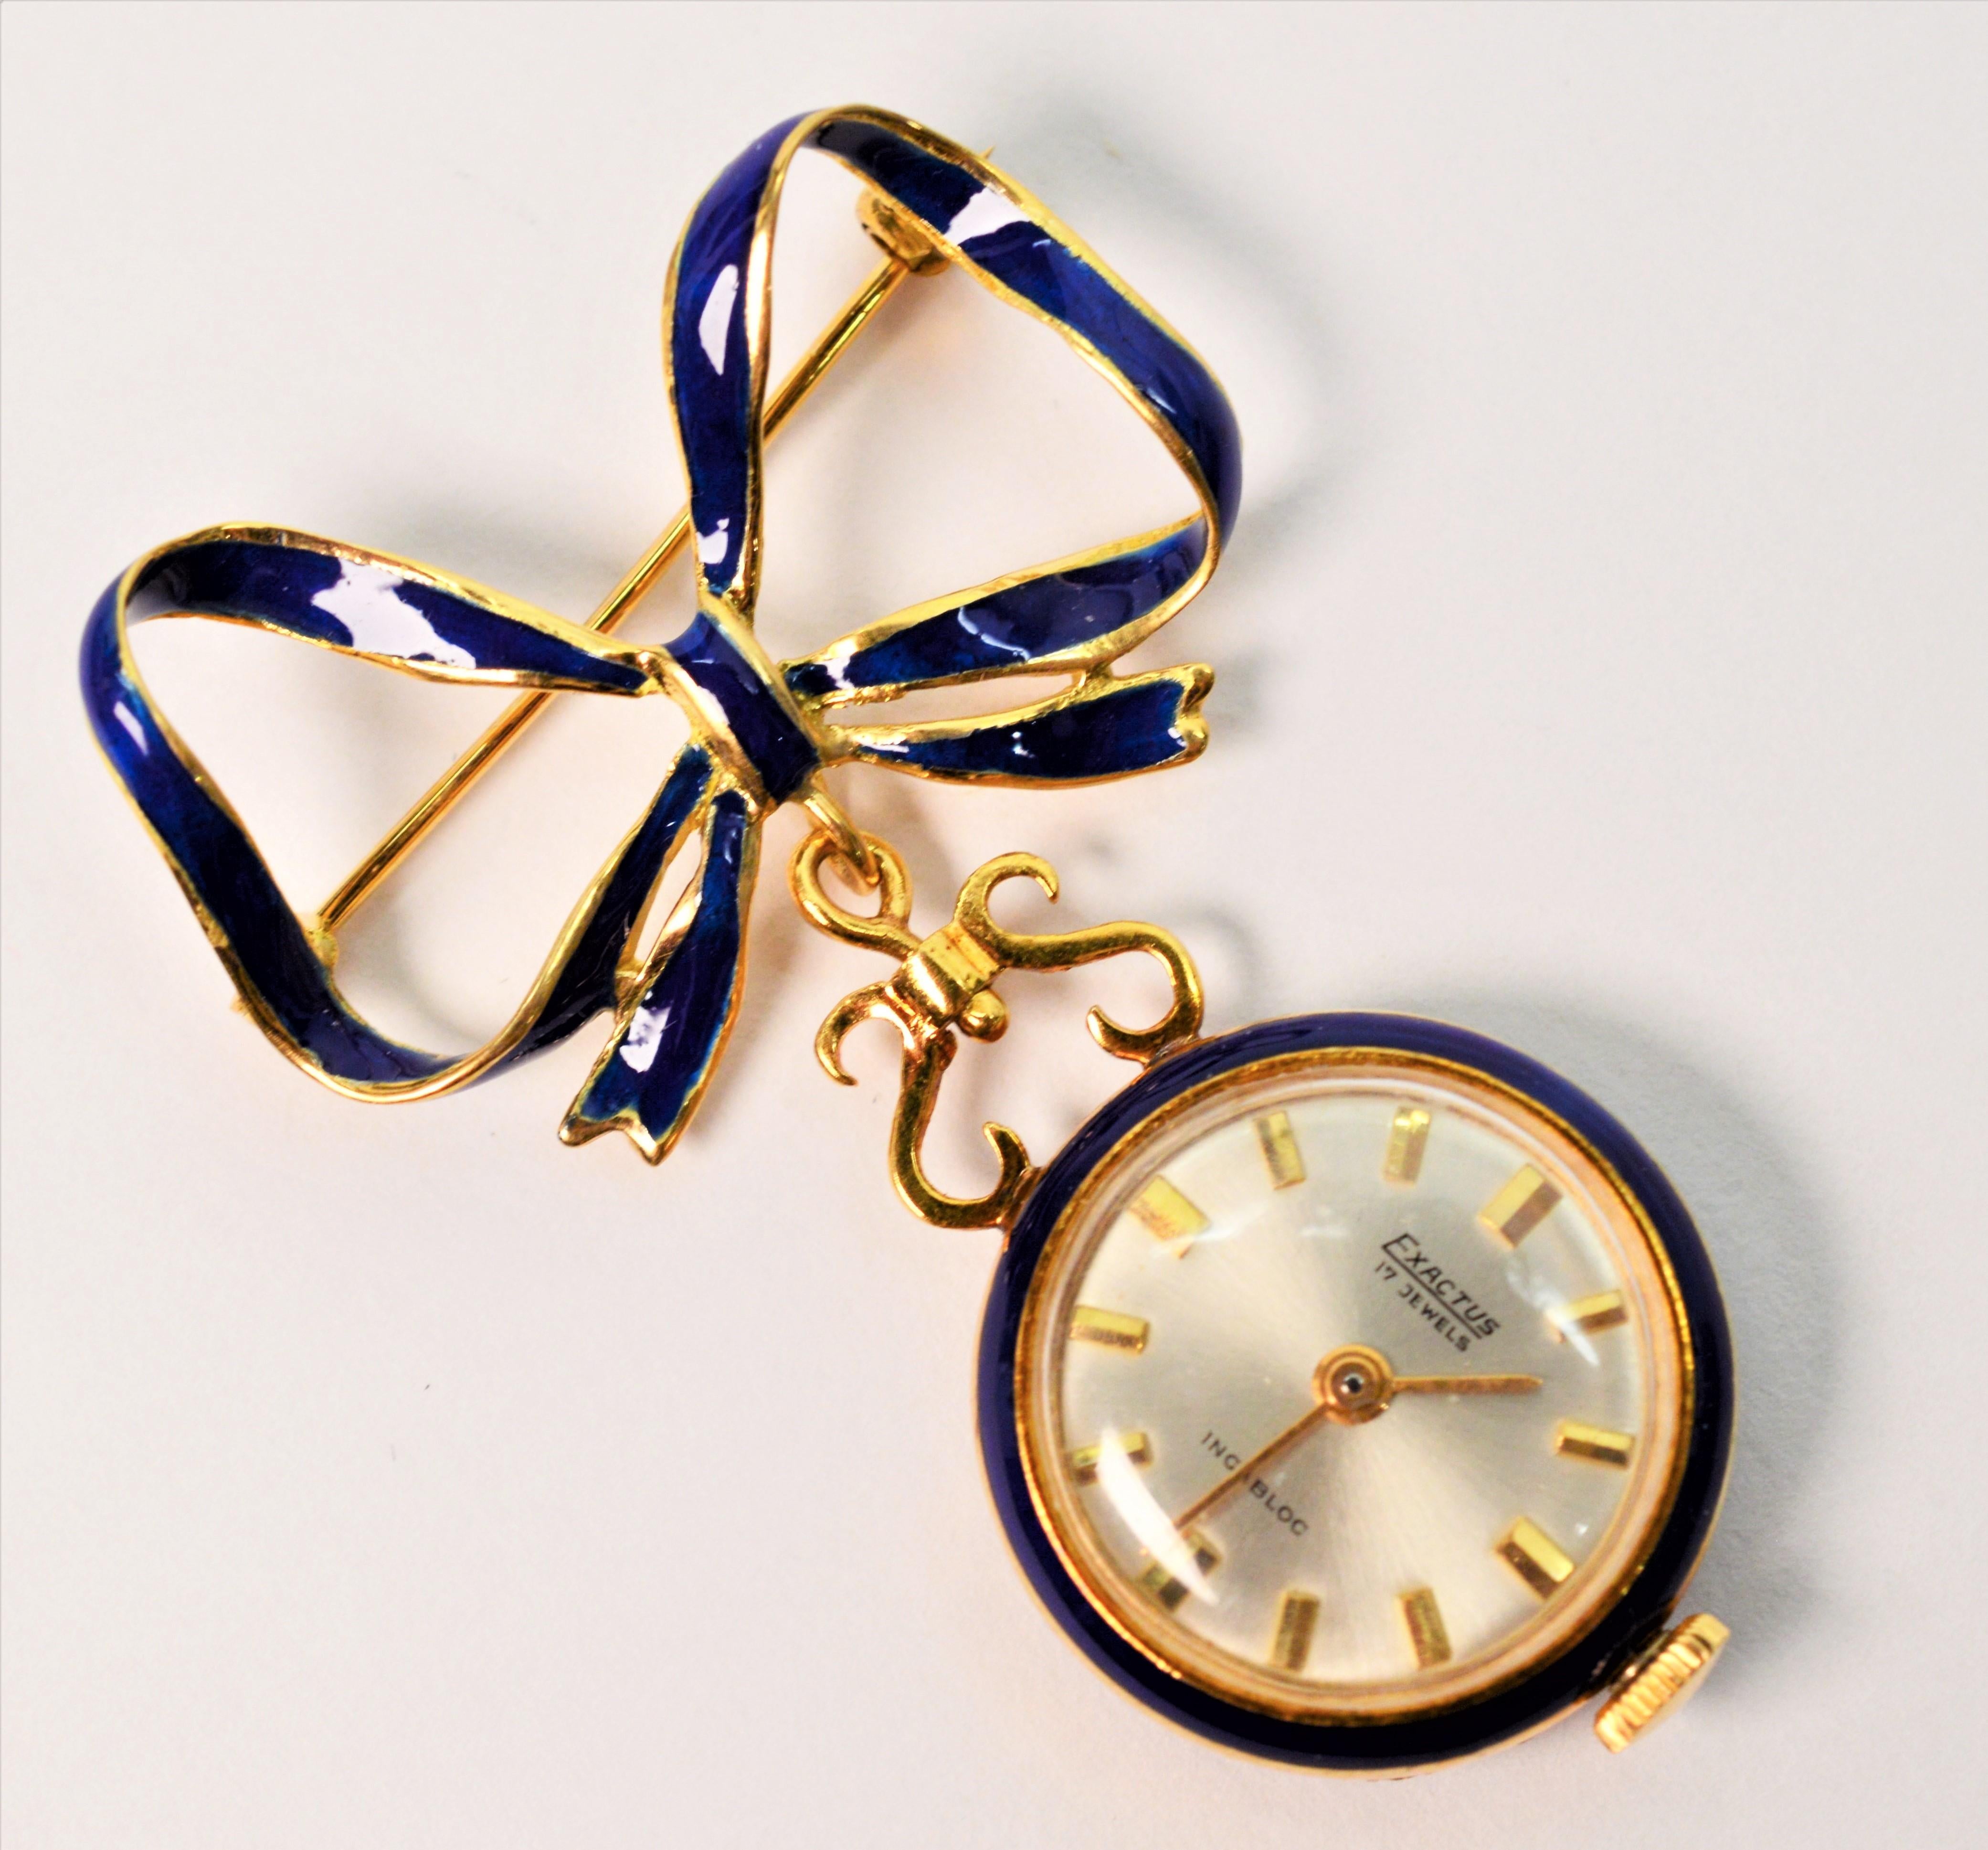 Italian Made Gold Watch Brooch with Blue Enamel Accents In Good Condition For Sale In Mount Kisco, NY